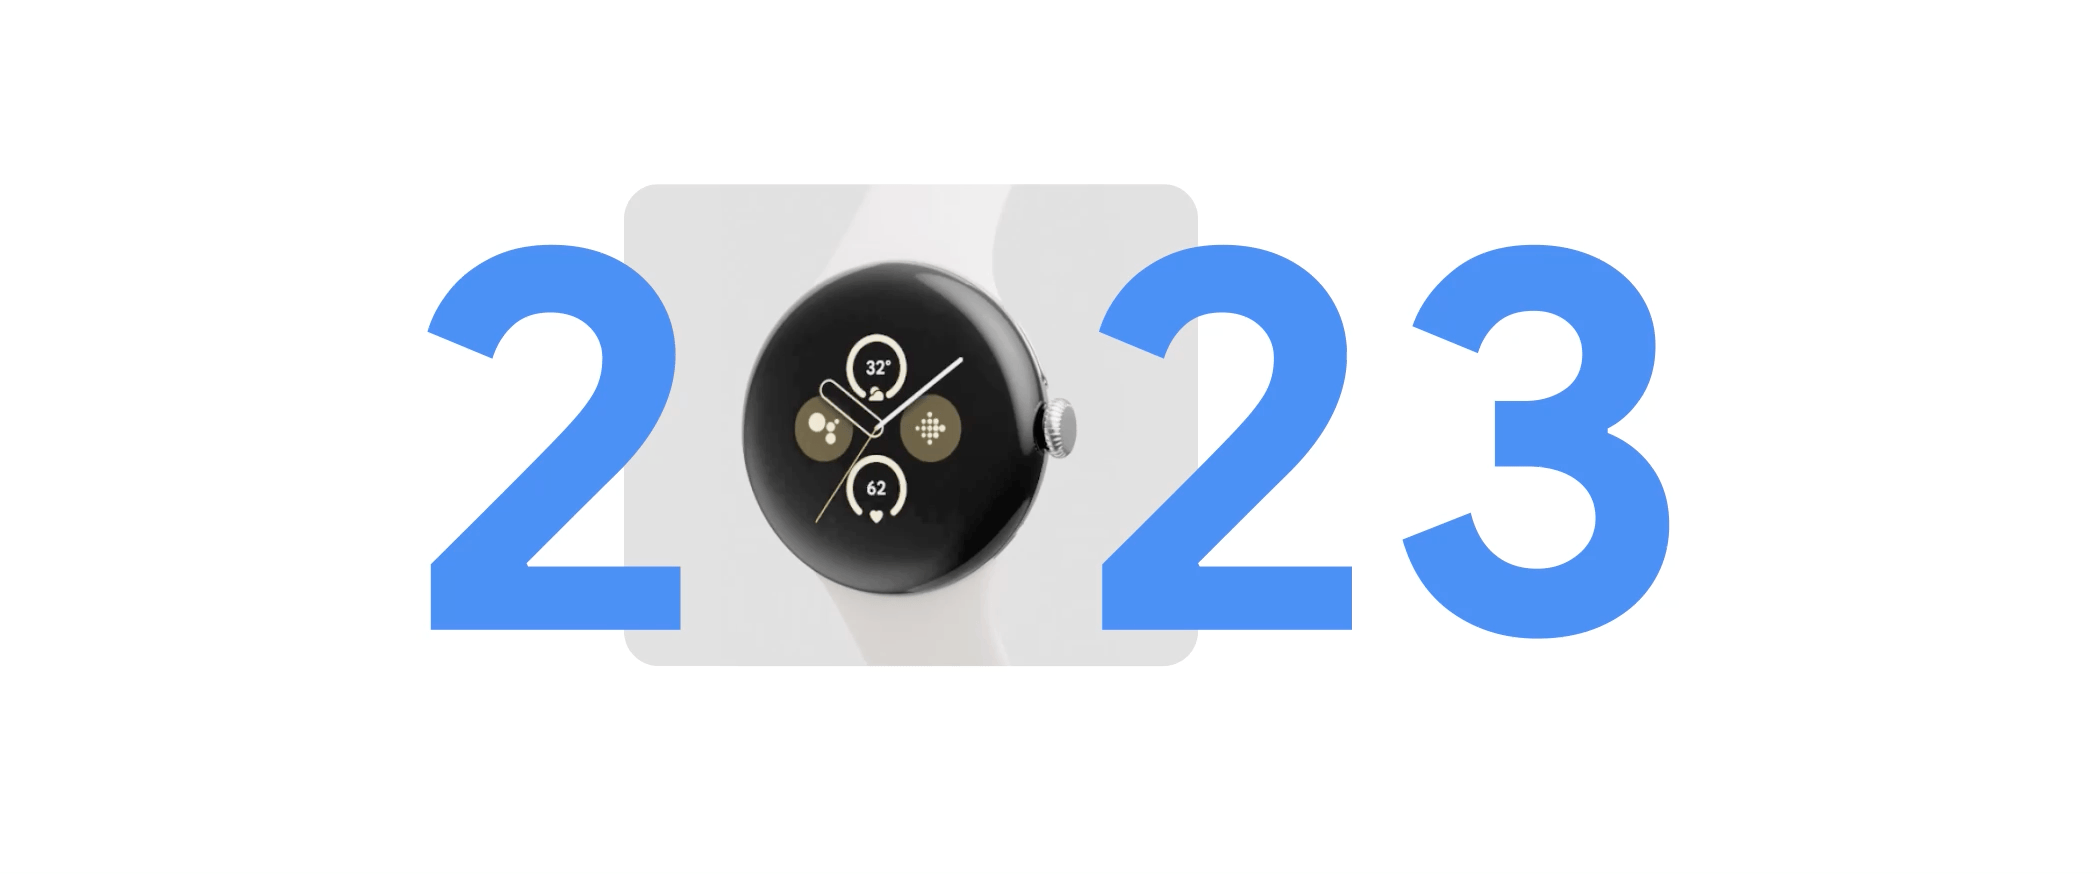 The numbers “2023” but the zero is substituted for an animated gif of rotating images, including a person running wearing a Google Pixel Watch 2, people using a Pixel Fold, an overheard image of Google Maps, a Pixel Tablet, the Android icon, etc.